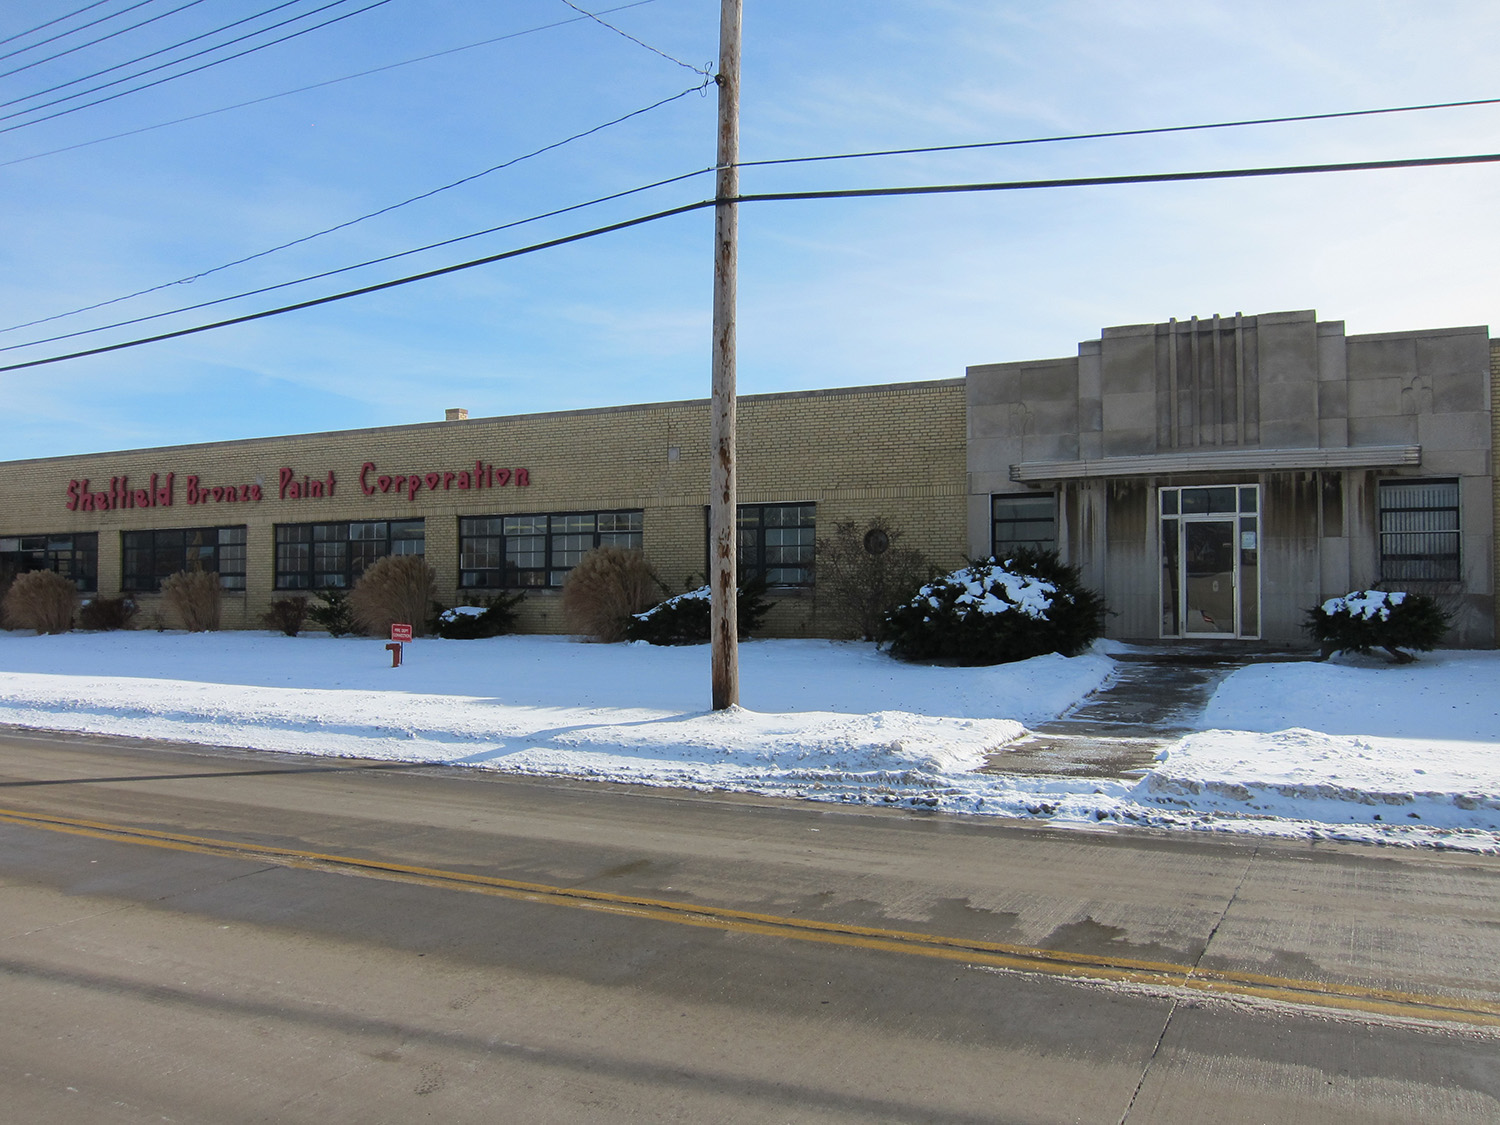  Exterior view of the Sheffield Bronze Paint Corporation 